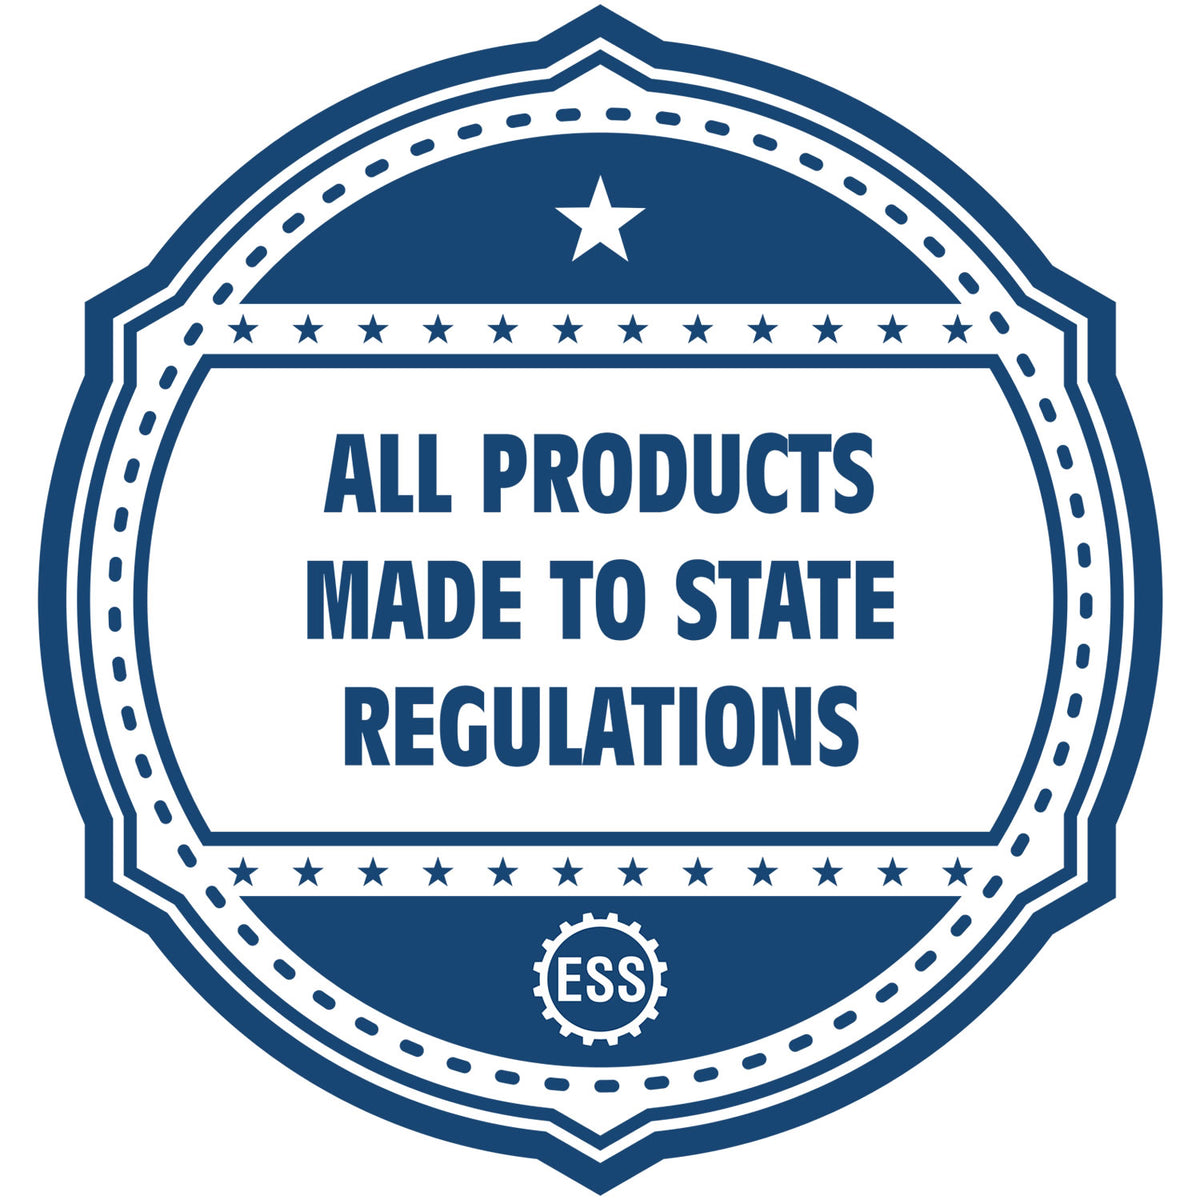 A blue icon or badge for the Gift Florida Landscape Architect Seal showing that this product is made in compliance with state regulations.